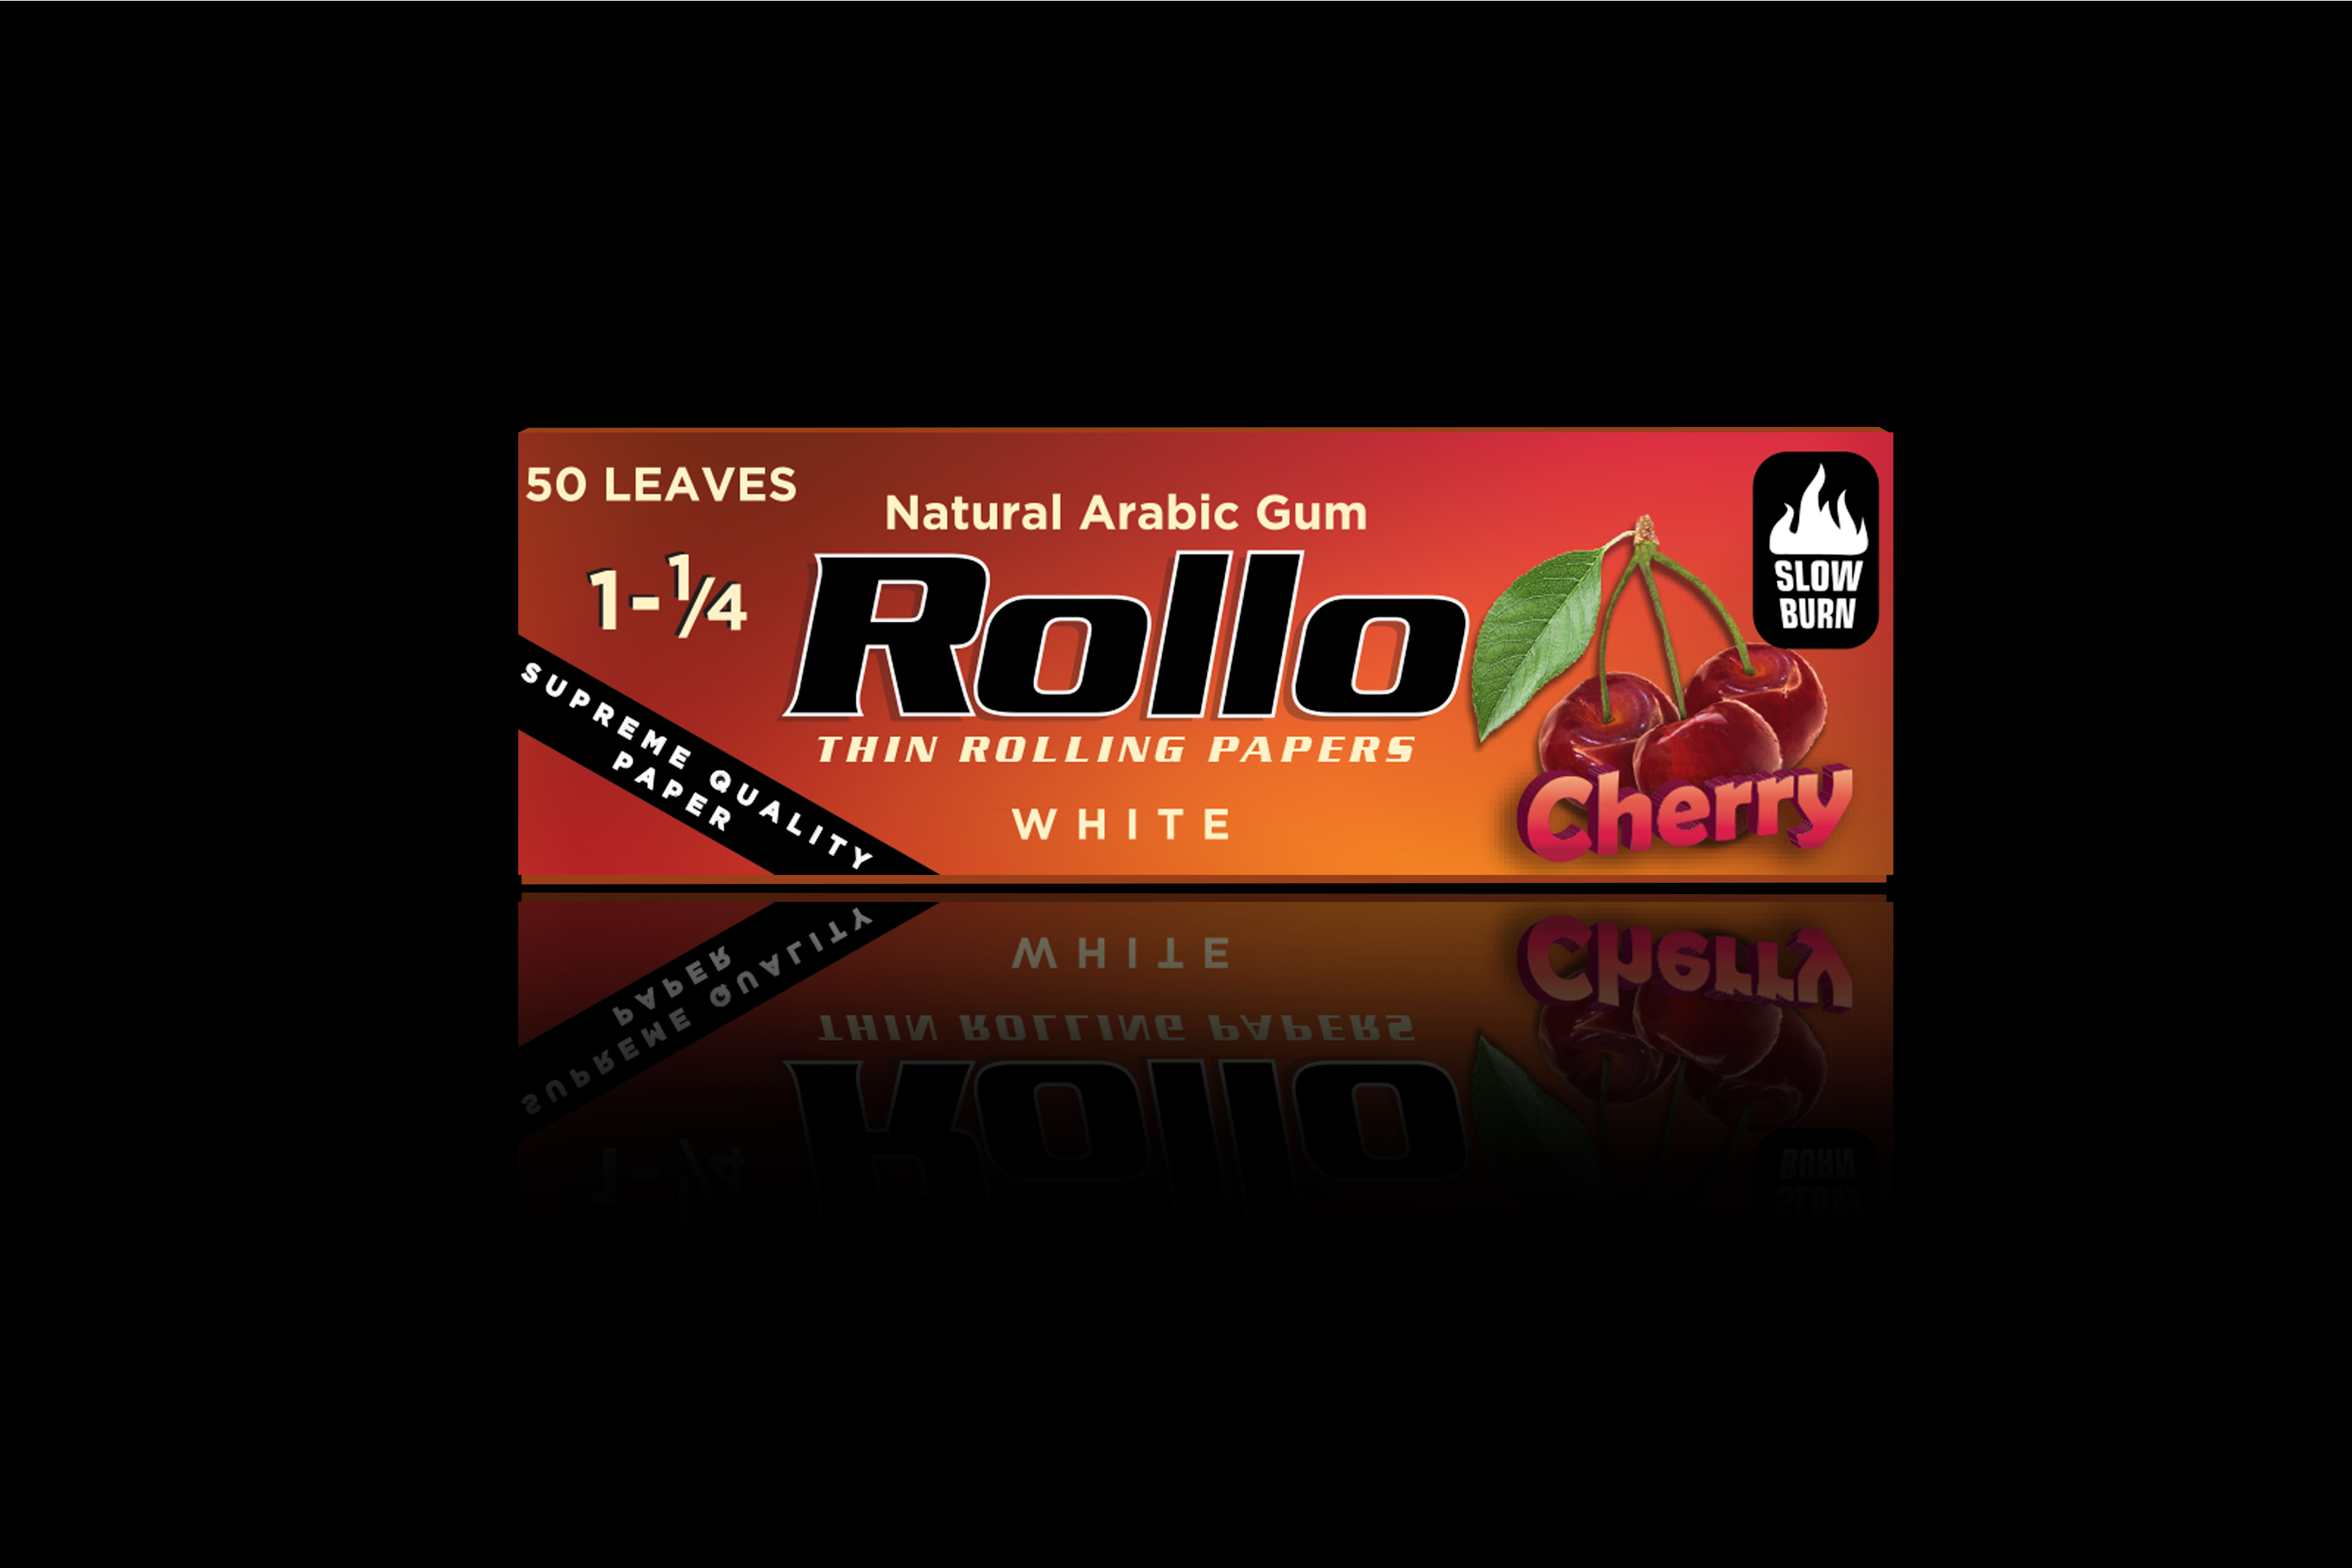 Rolling Papers, Cherry, Spanish 1 1/4 44 x 78